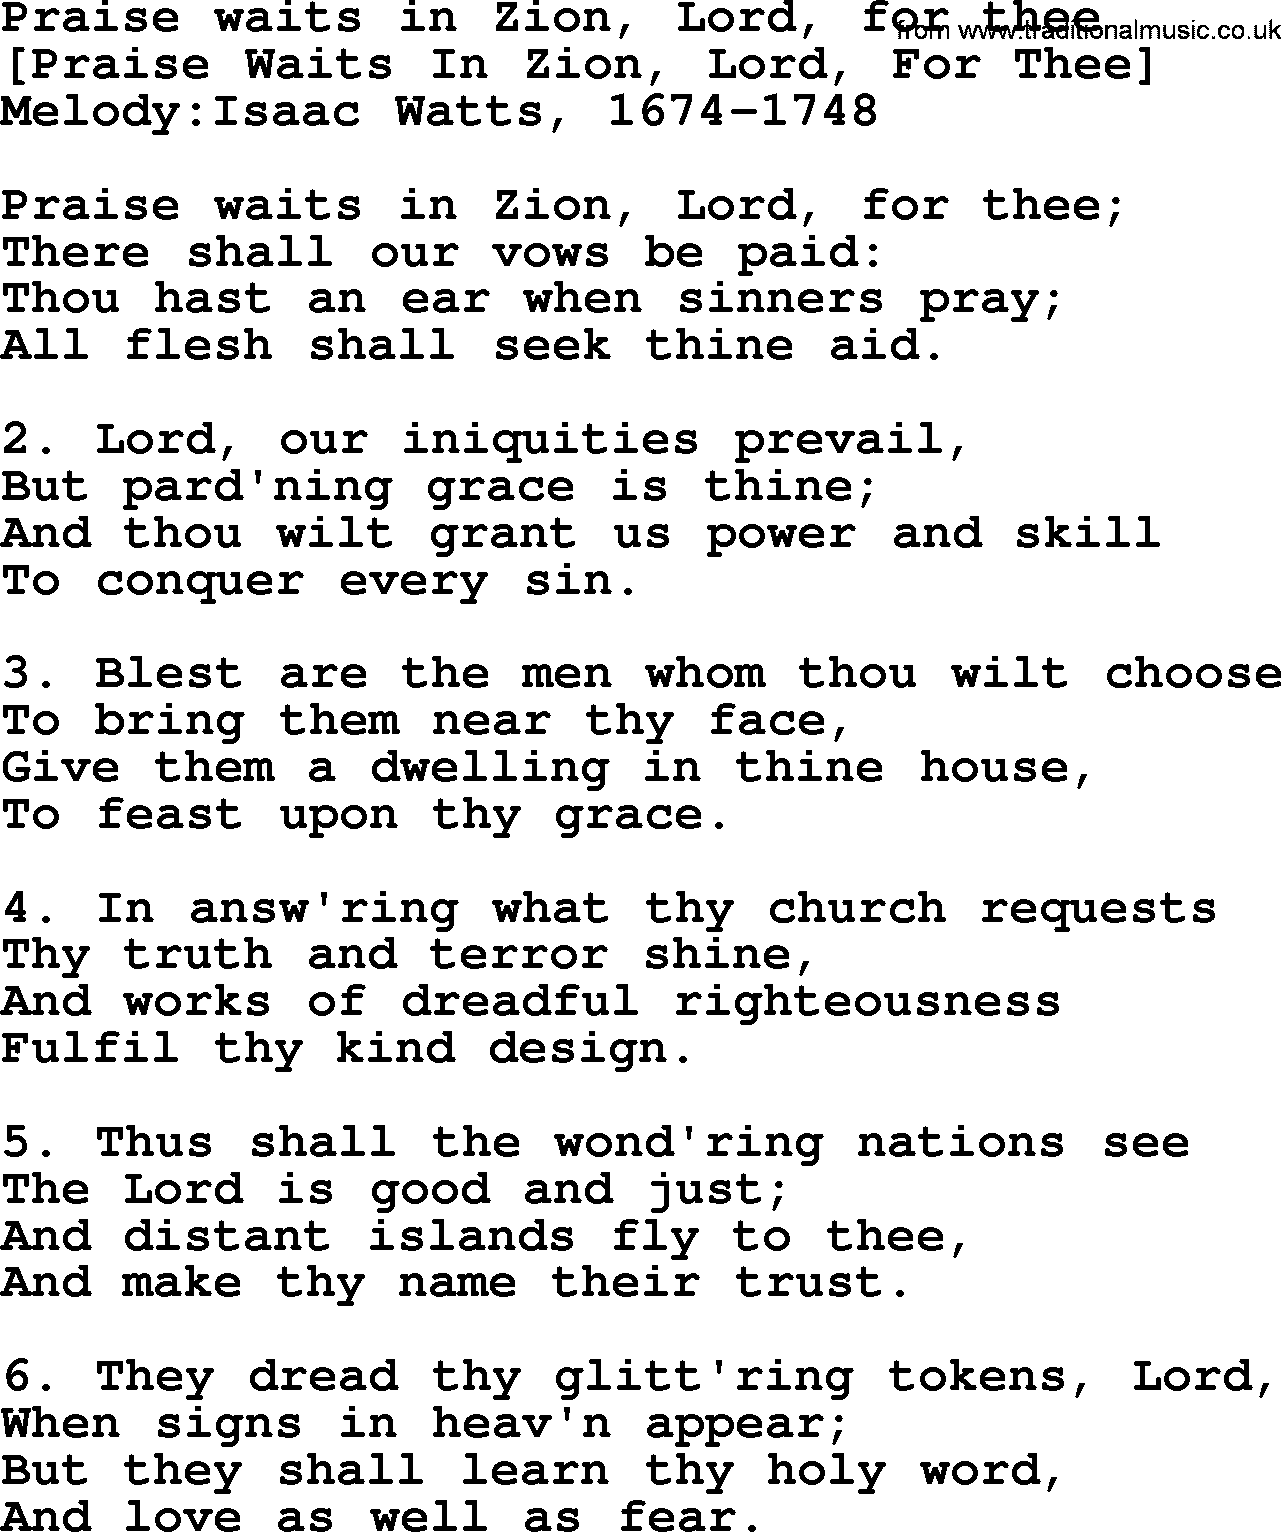 Old English Song: Praise Waits In Zion, Lord, For Thee lyrics